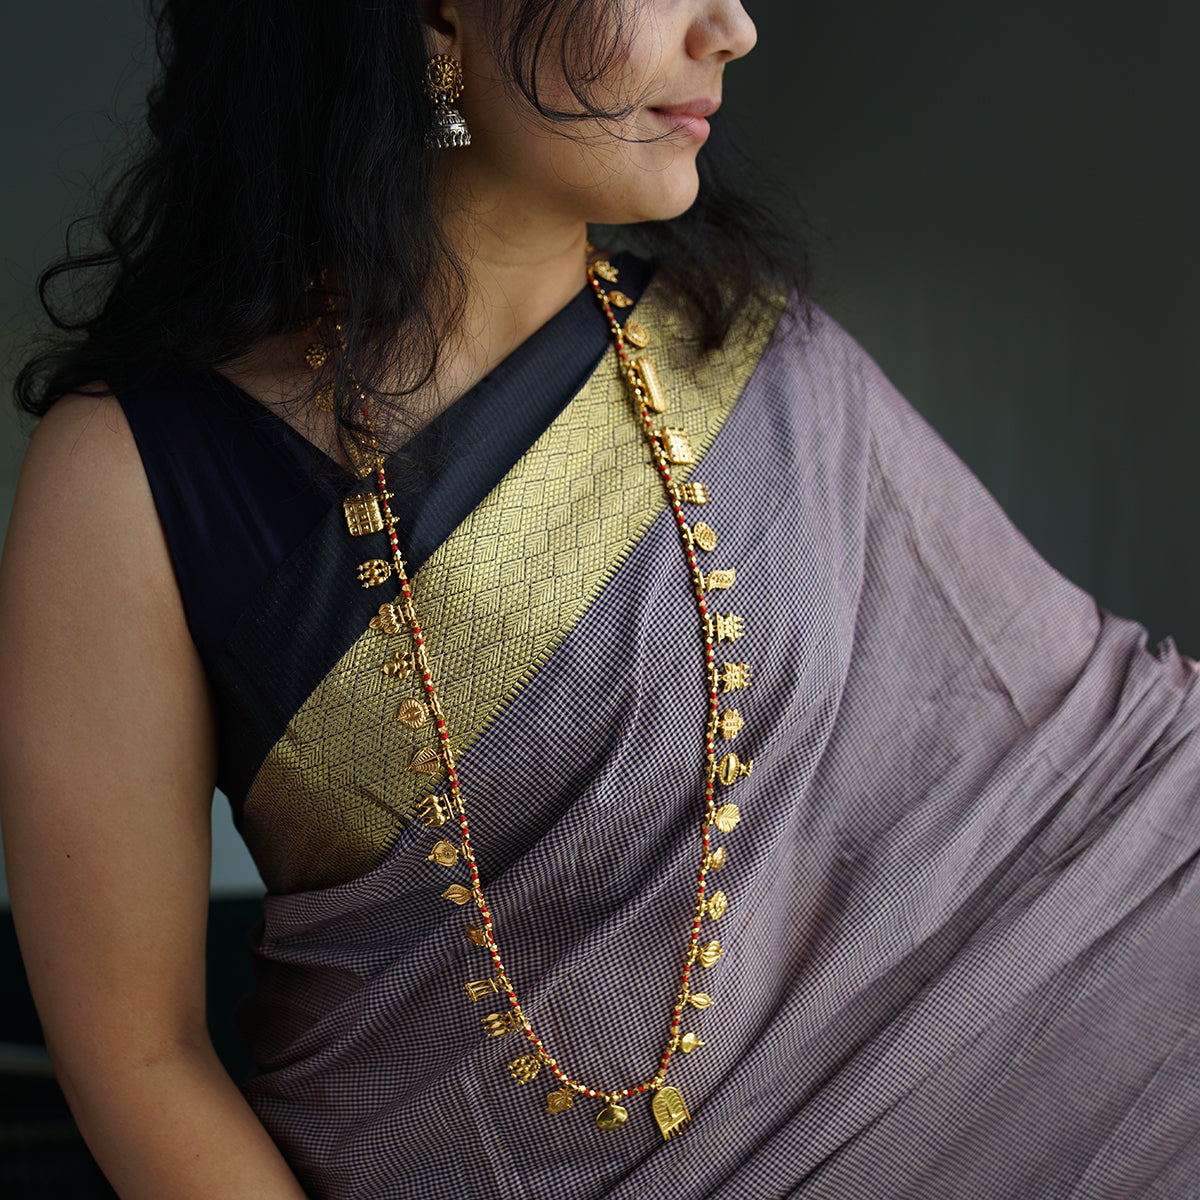 a woman in a sari is wearing a necklace